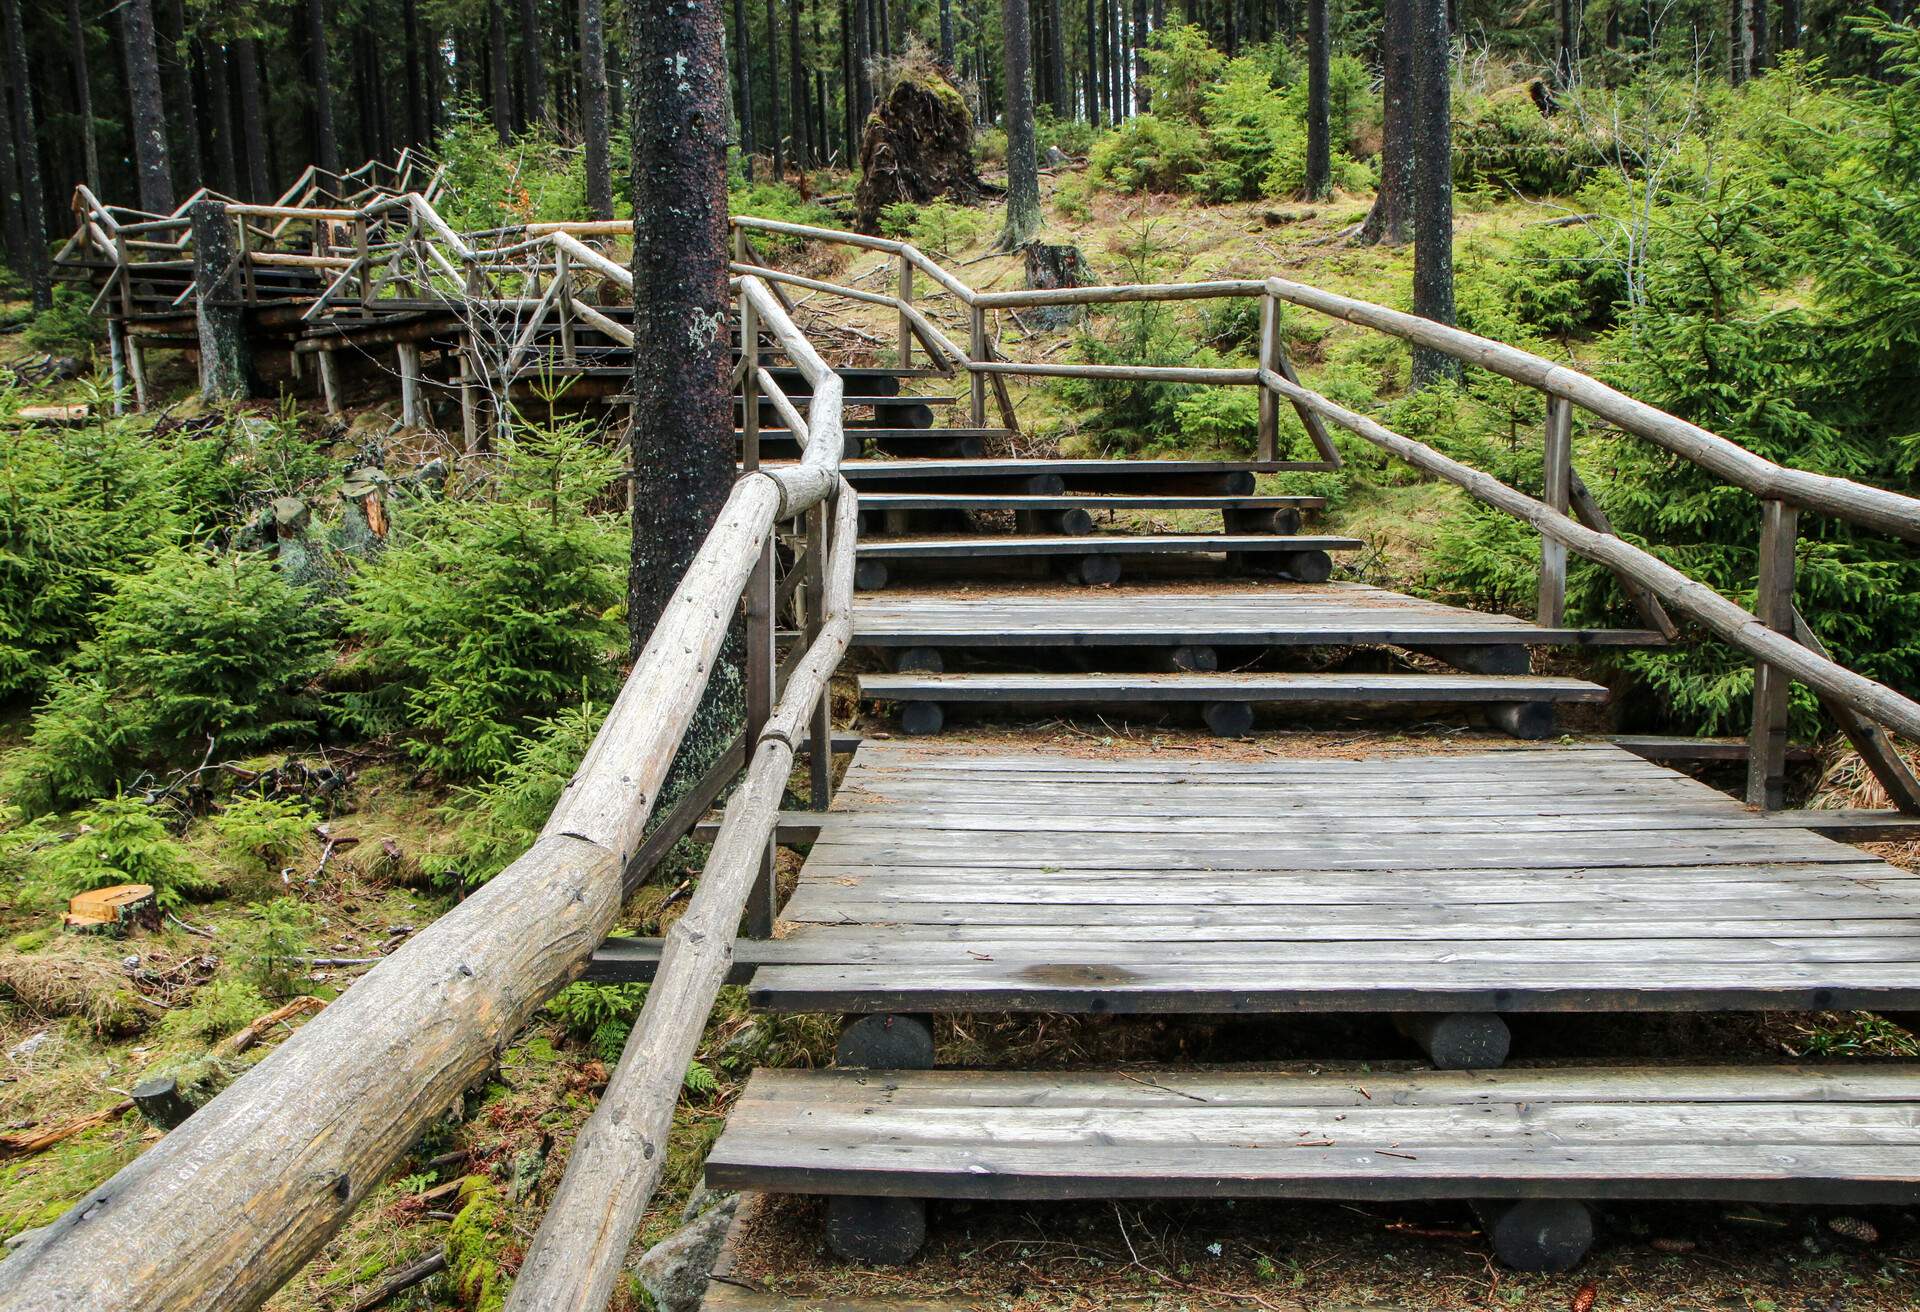 The wooden footpath for the tourist inside the woods of national protected area Šumava in Czech Republic. Leading to Boubín hill.